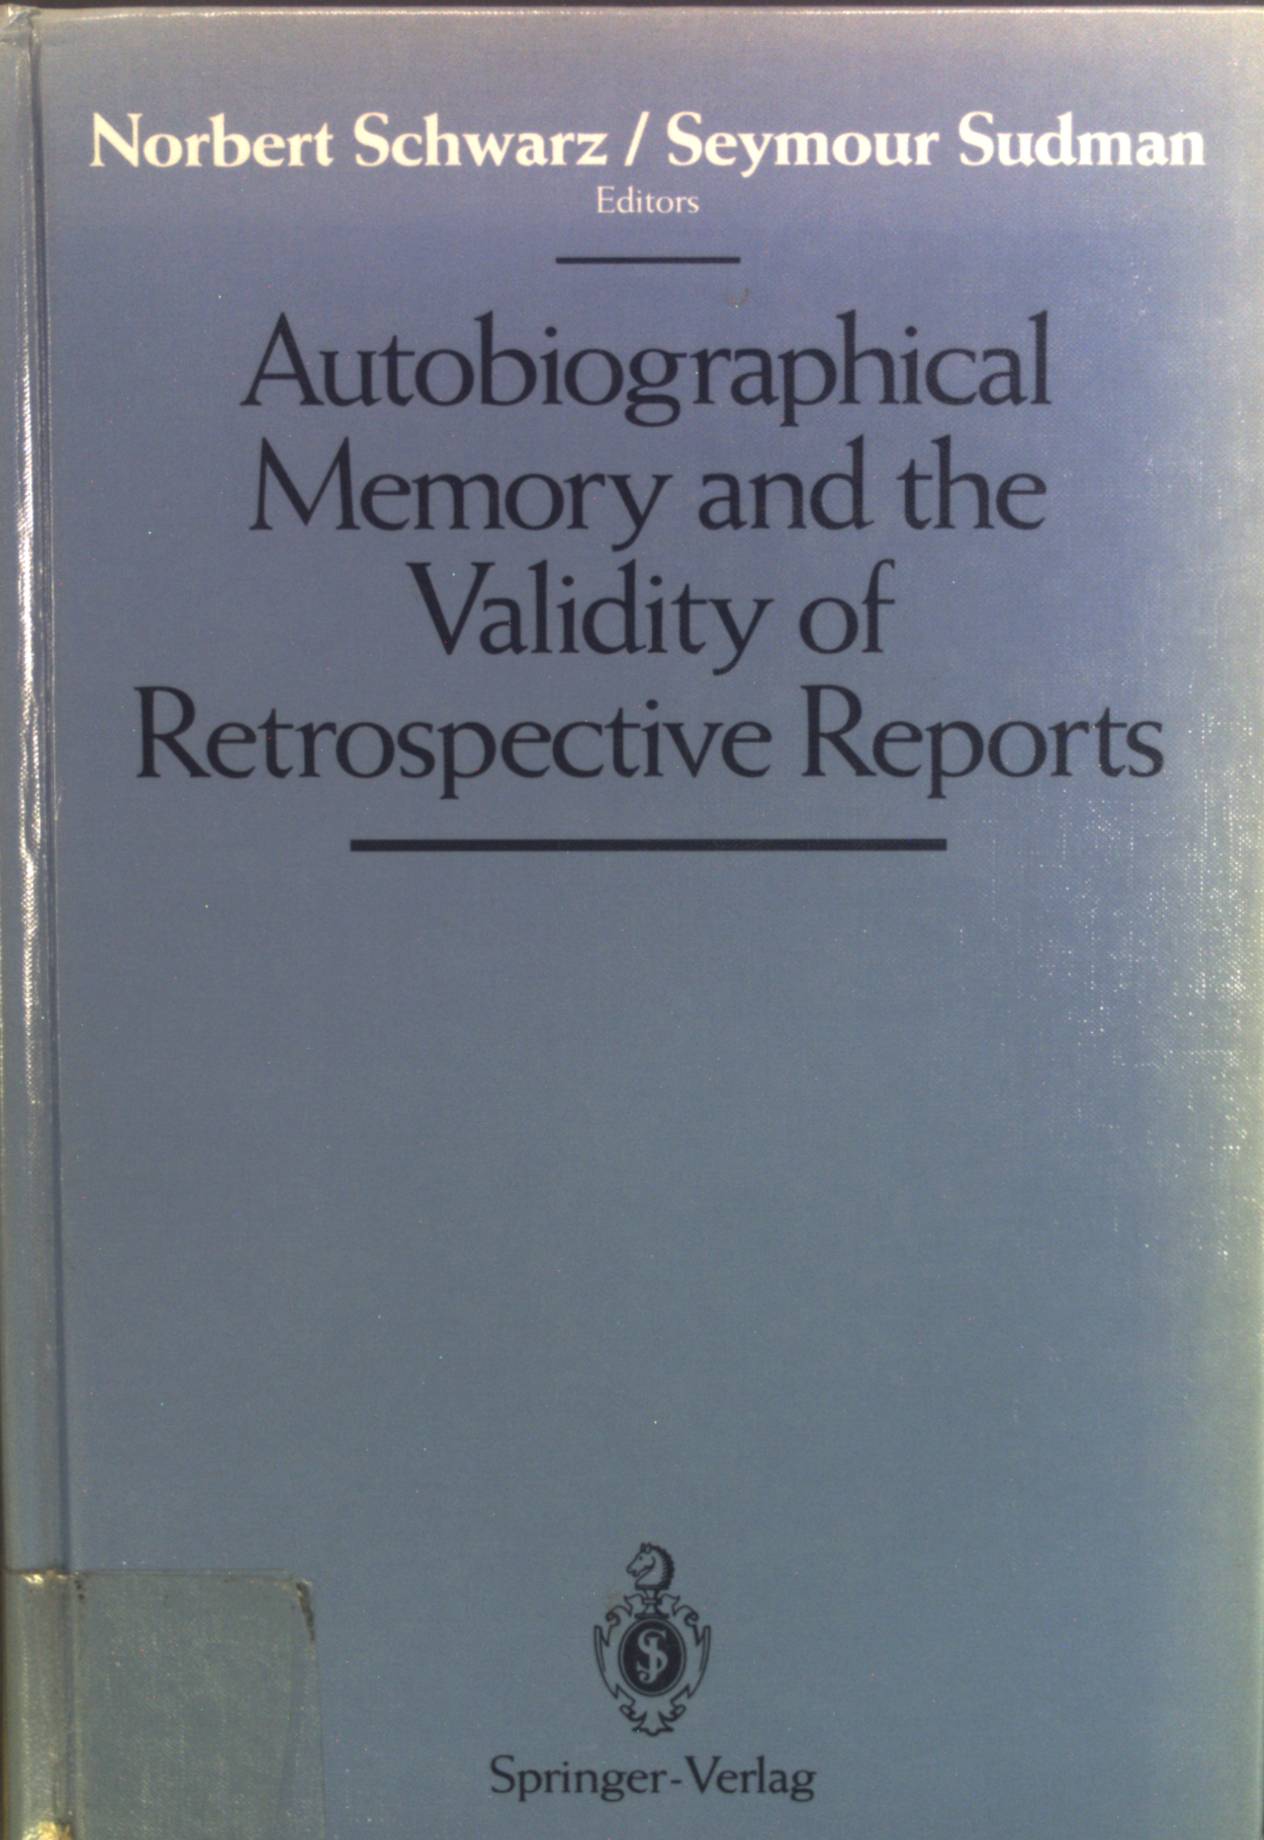 Autobiographical Memory and the Validity of Retrospective Reports. - Schwarz, Norbert and Seymour Sudman